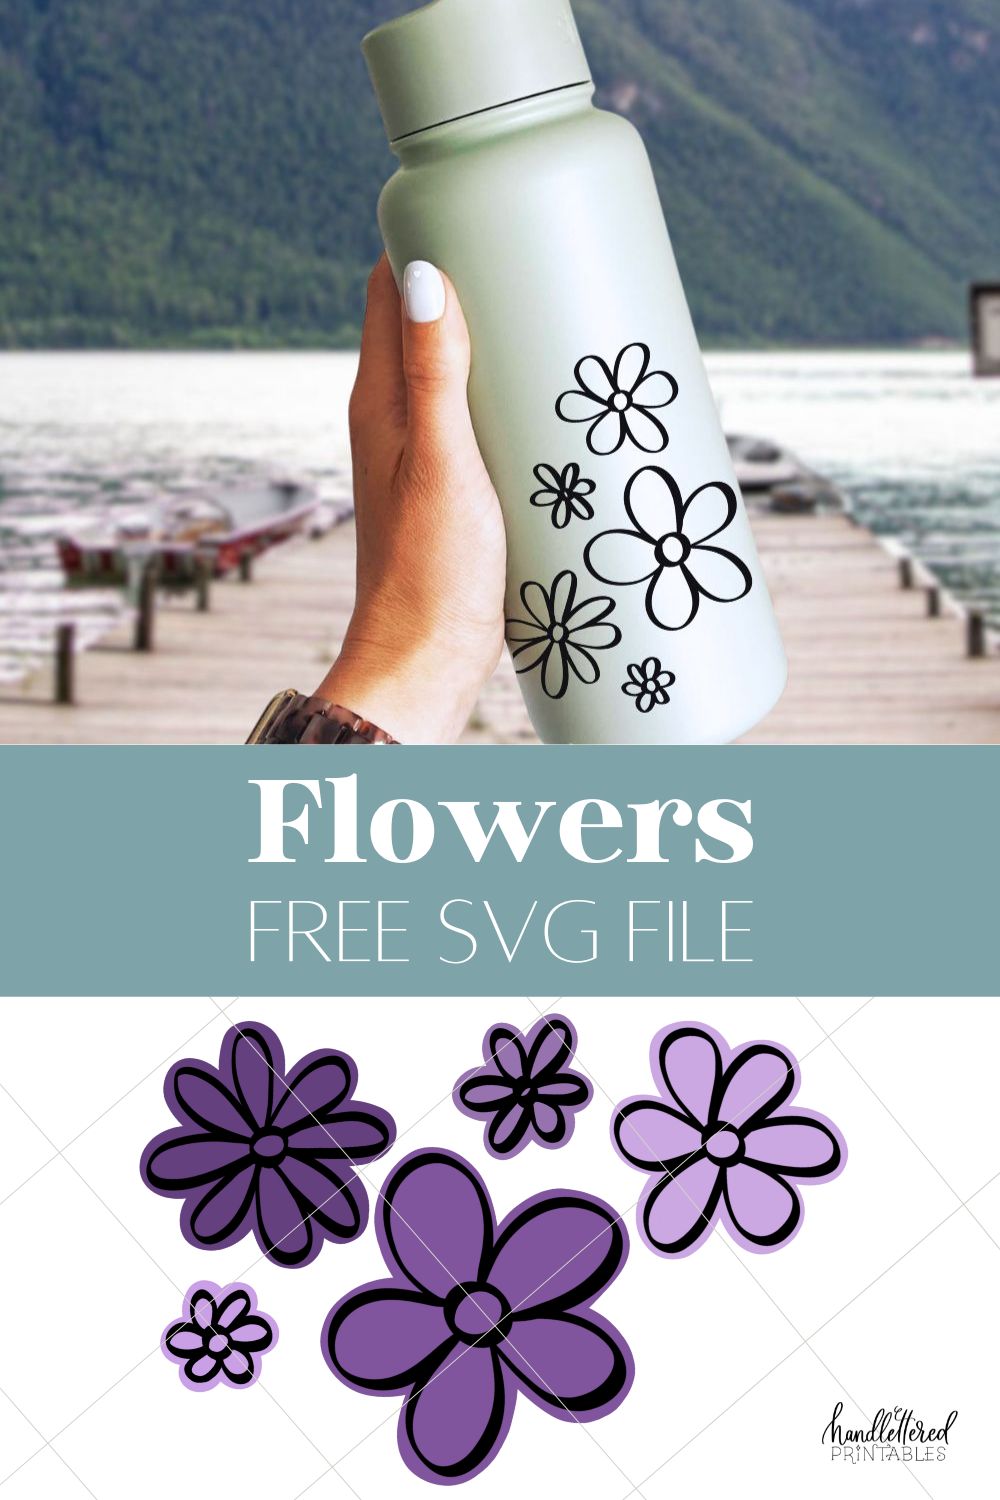 2 Layer cut file of 5 hand drawn flowers (free) shown on a white background, top image shows just the outline applied to a metal water bottle held in front of a dock. Title text reads: Flowers Free SVG File